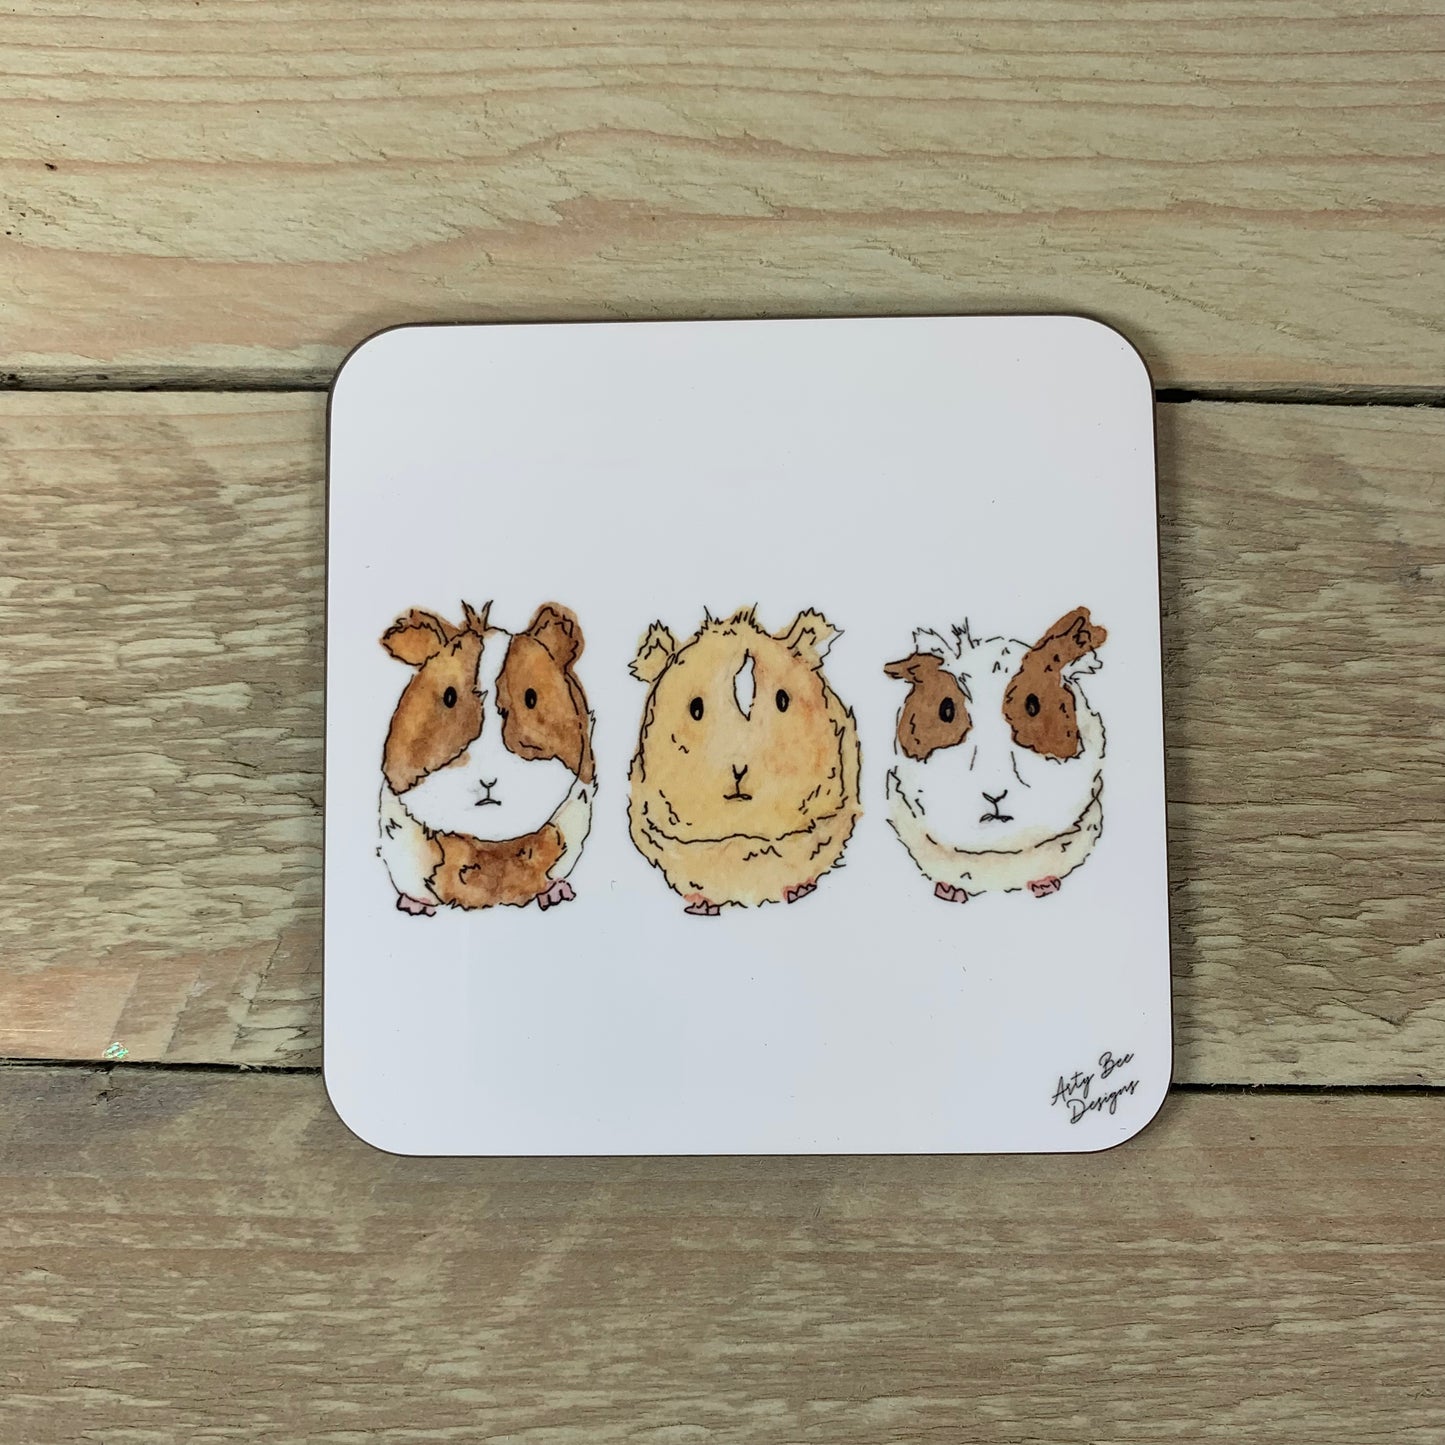 Guinea pig Coaster and Placemat Set